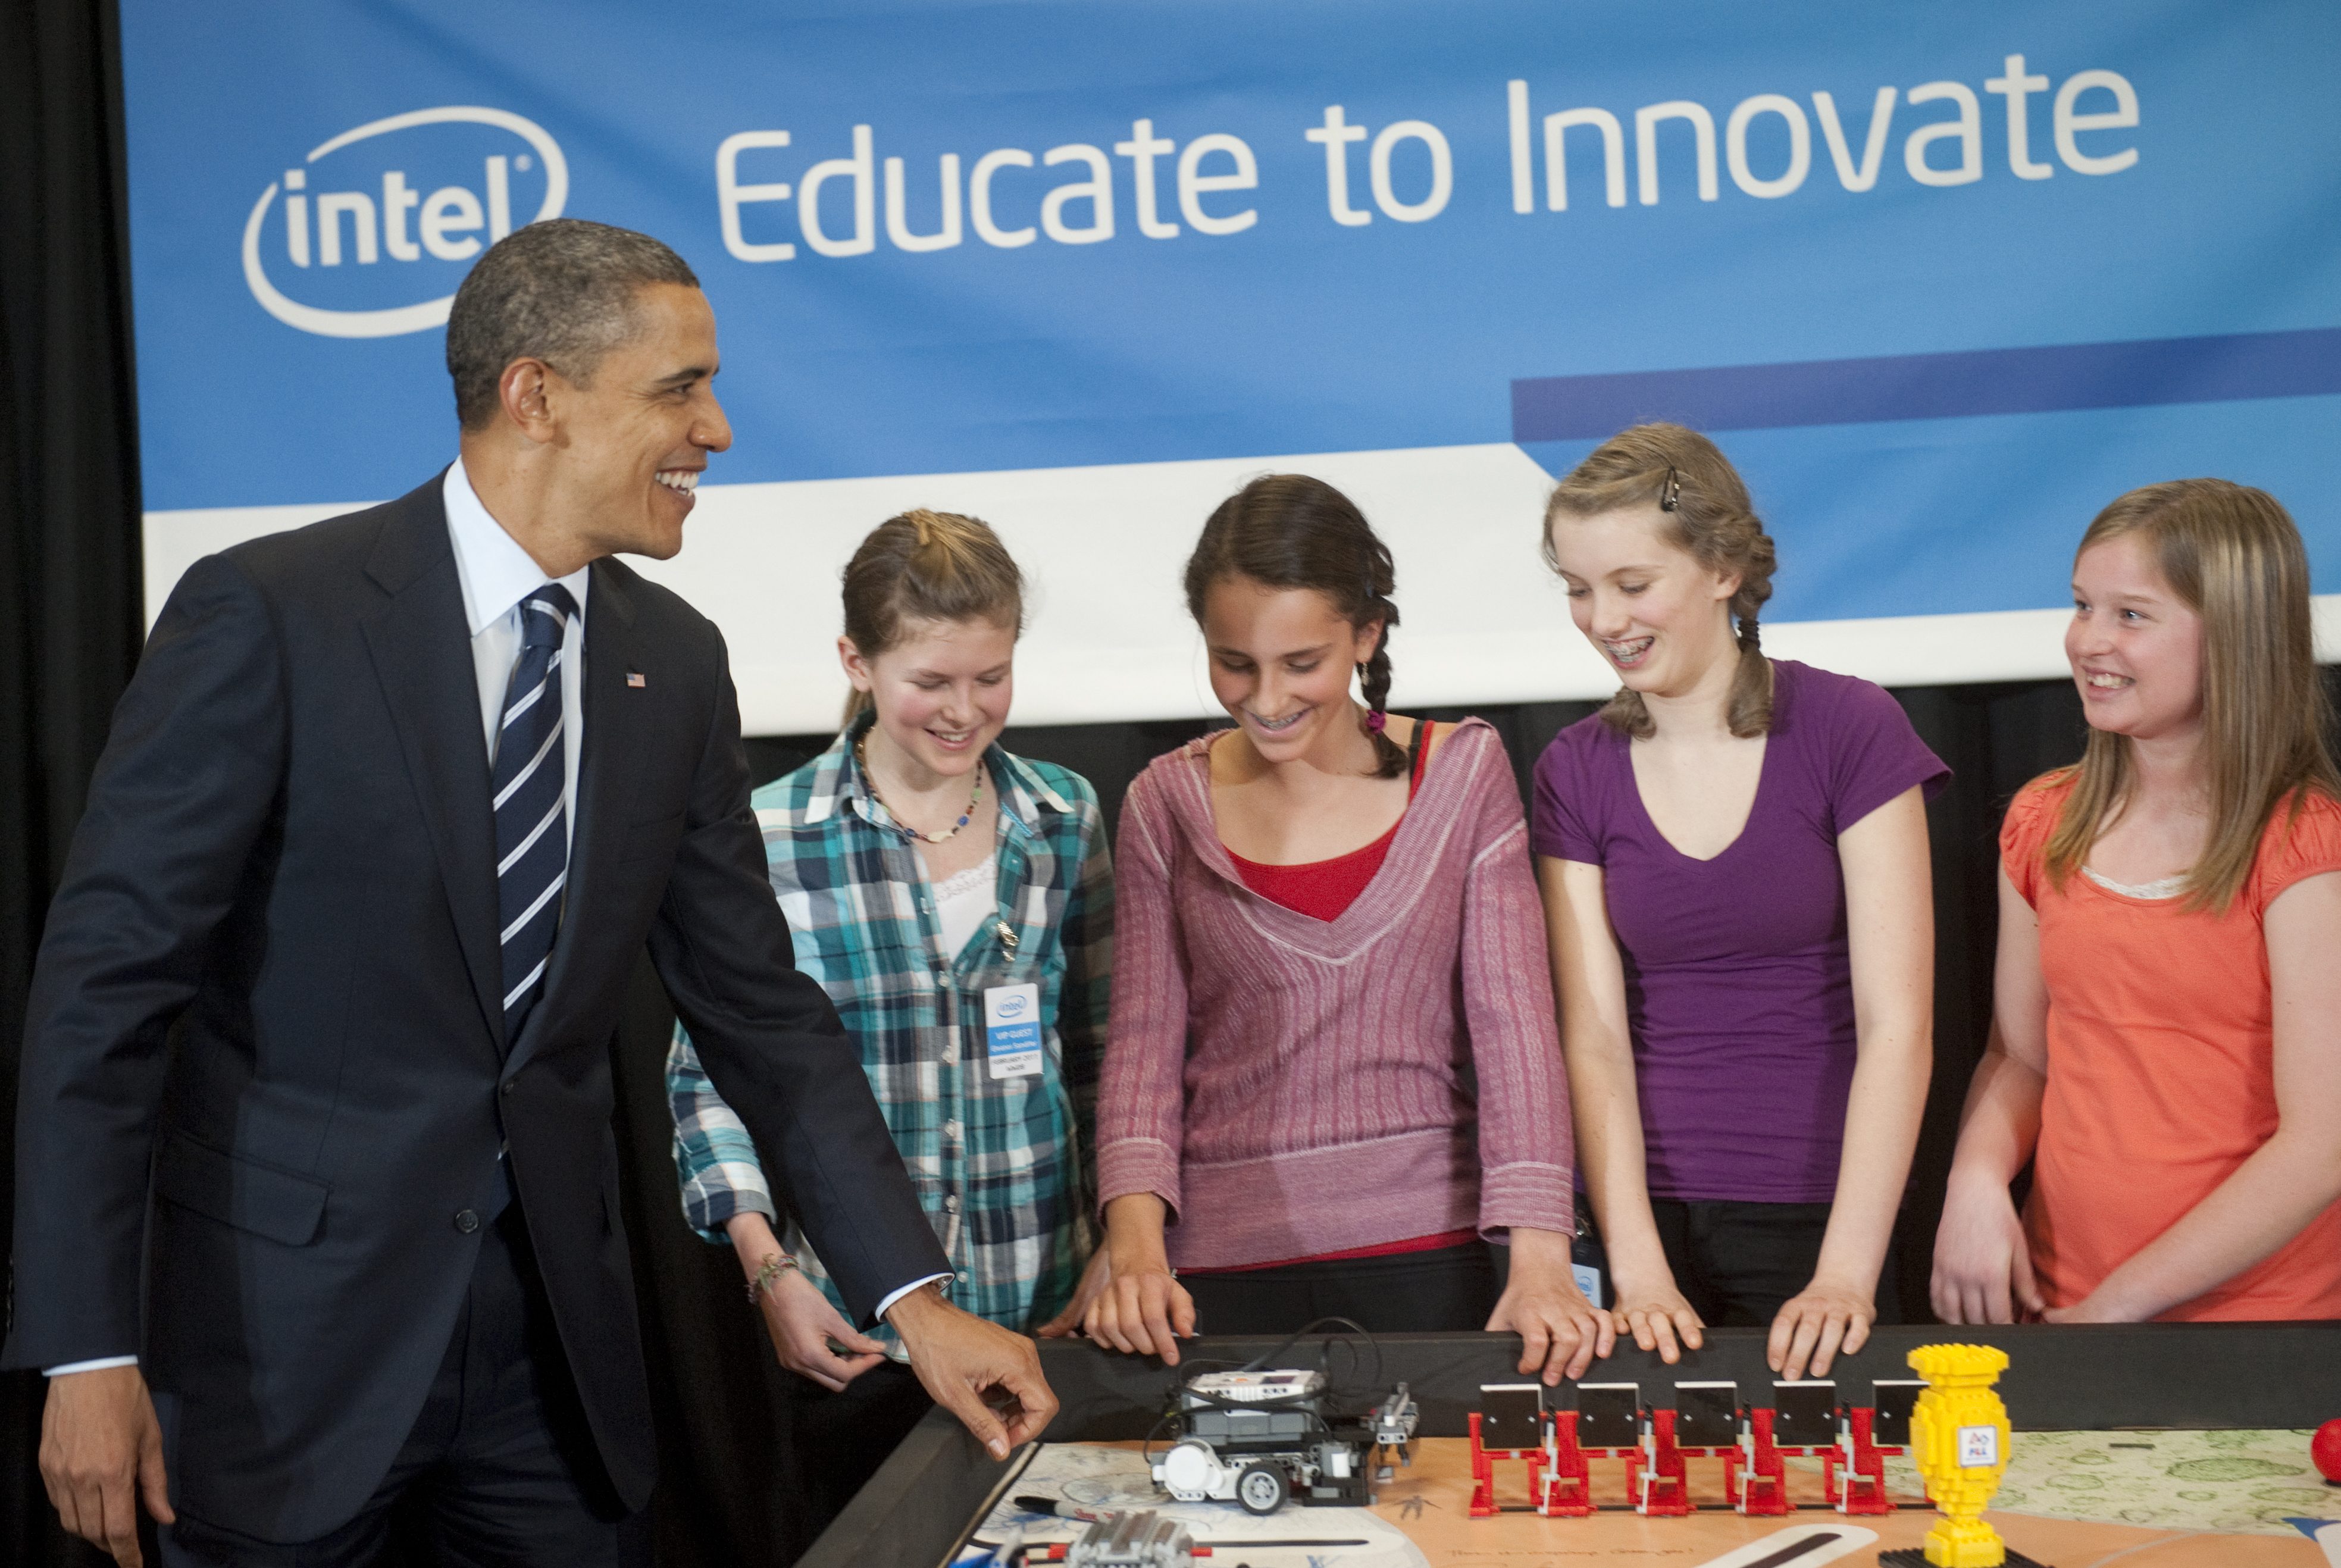 US President Barack Obama speaks with Intel Science Talent Search finalists, 7th graders from the BindleBot Intel First LEGO Robotics Team from Robert Gray Middle School, during a student demonstration at Intel in Hillsboro, Oregon, on February 18, 2011.        AFP PHOTO / Saul LOEB (Photo credit should read SAUL LOEB/AFP/Getty Images) (SAUL LOEB—AFP/Getty Images)